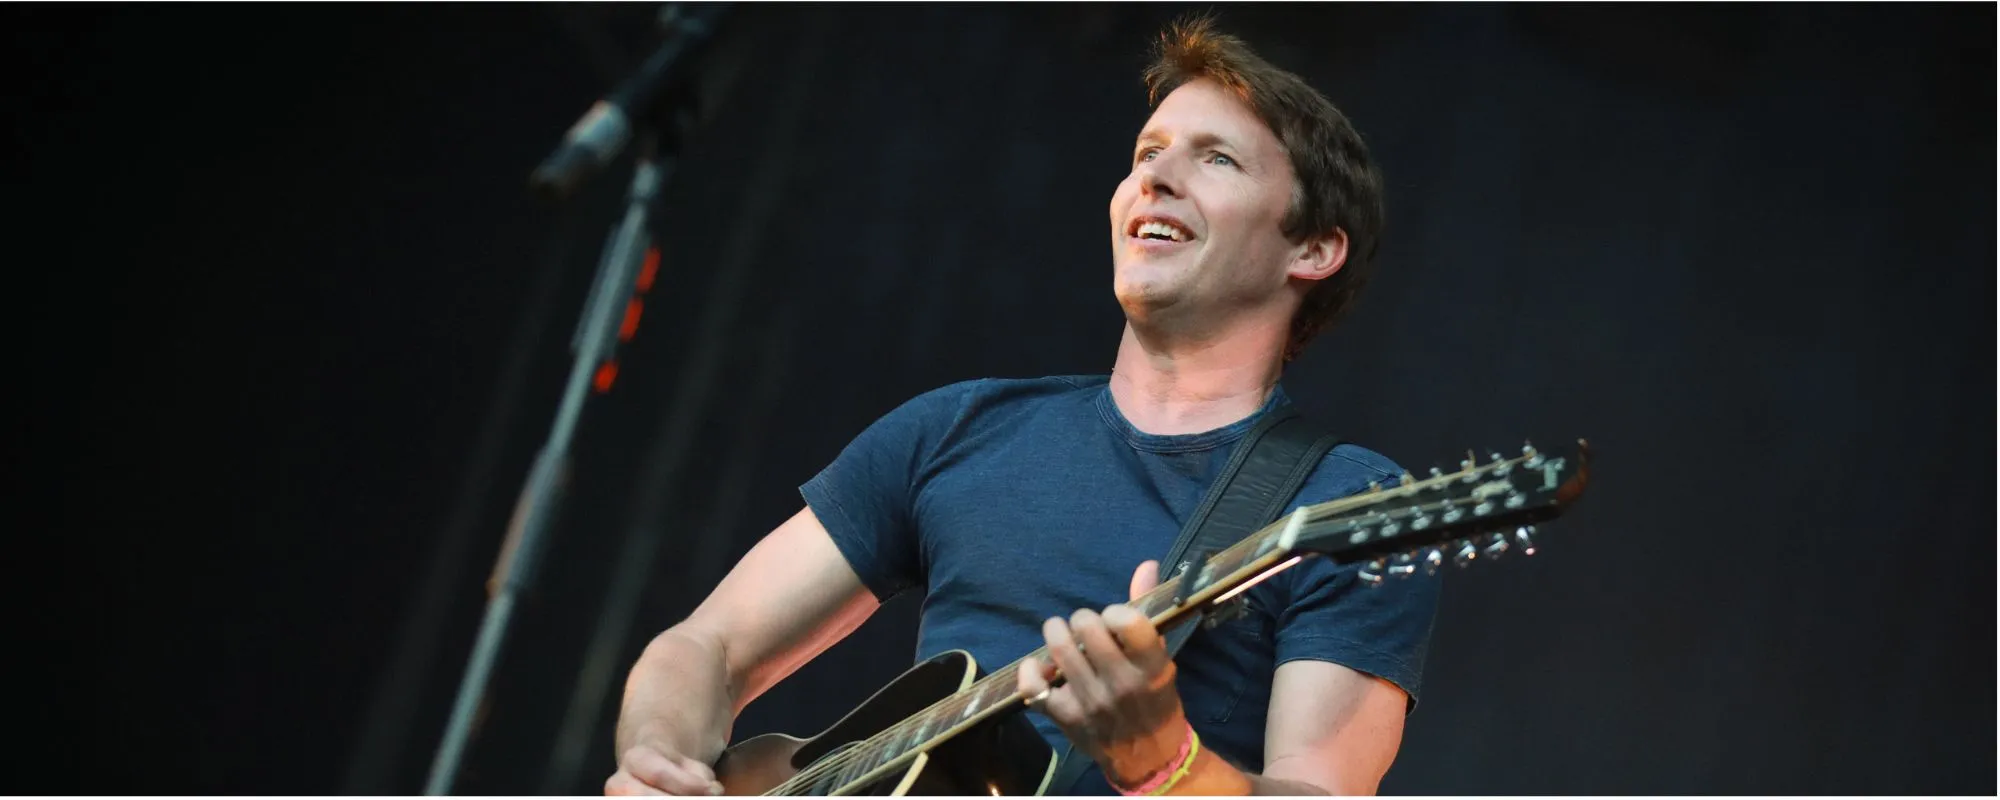 The Meaning Behind “You’re Beautiful” by James Blunt